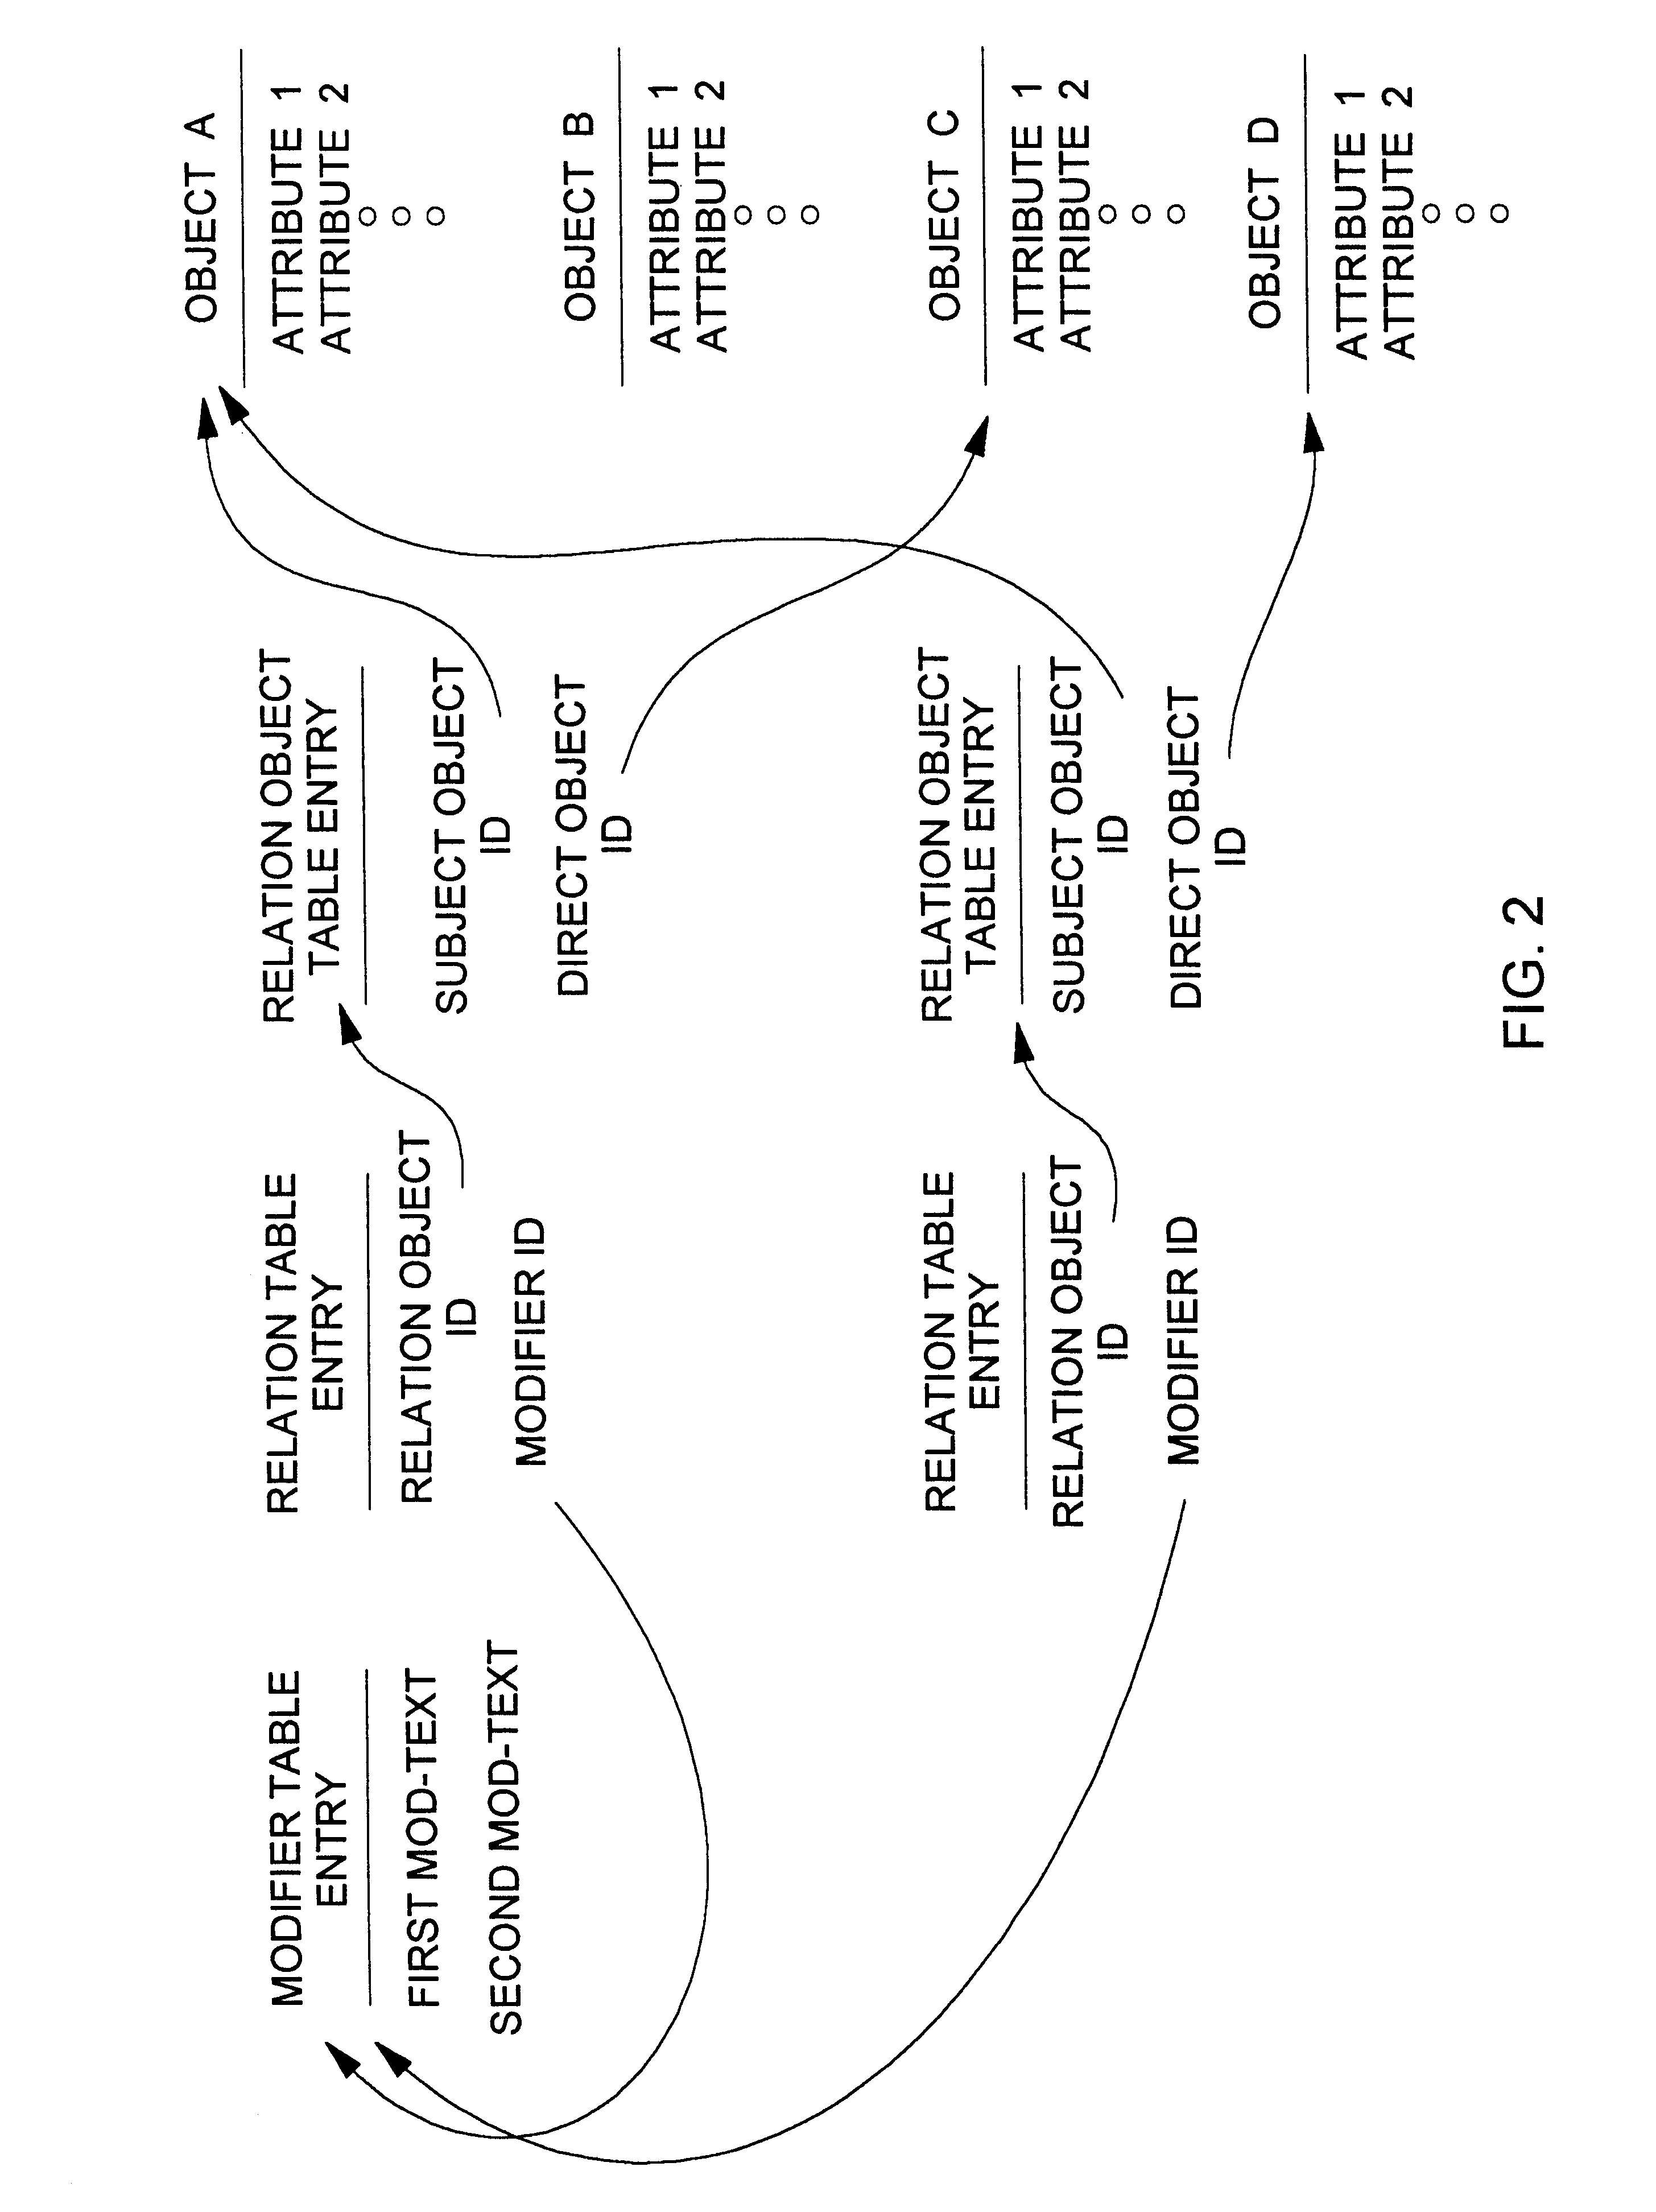 Database query handler supporting querying of textual annotations of relations between data objects